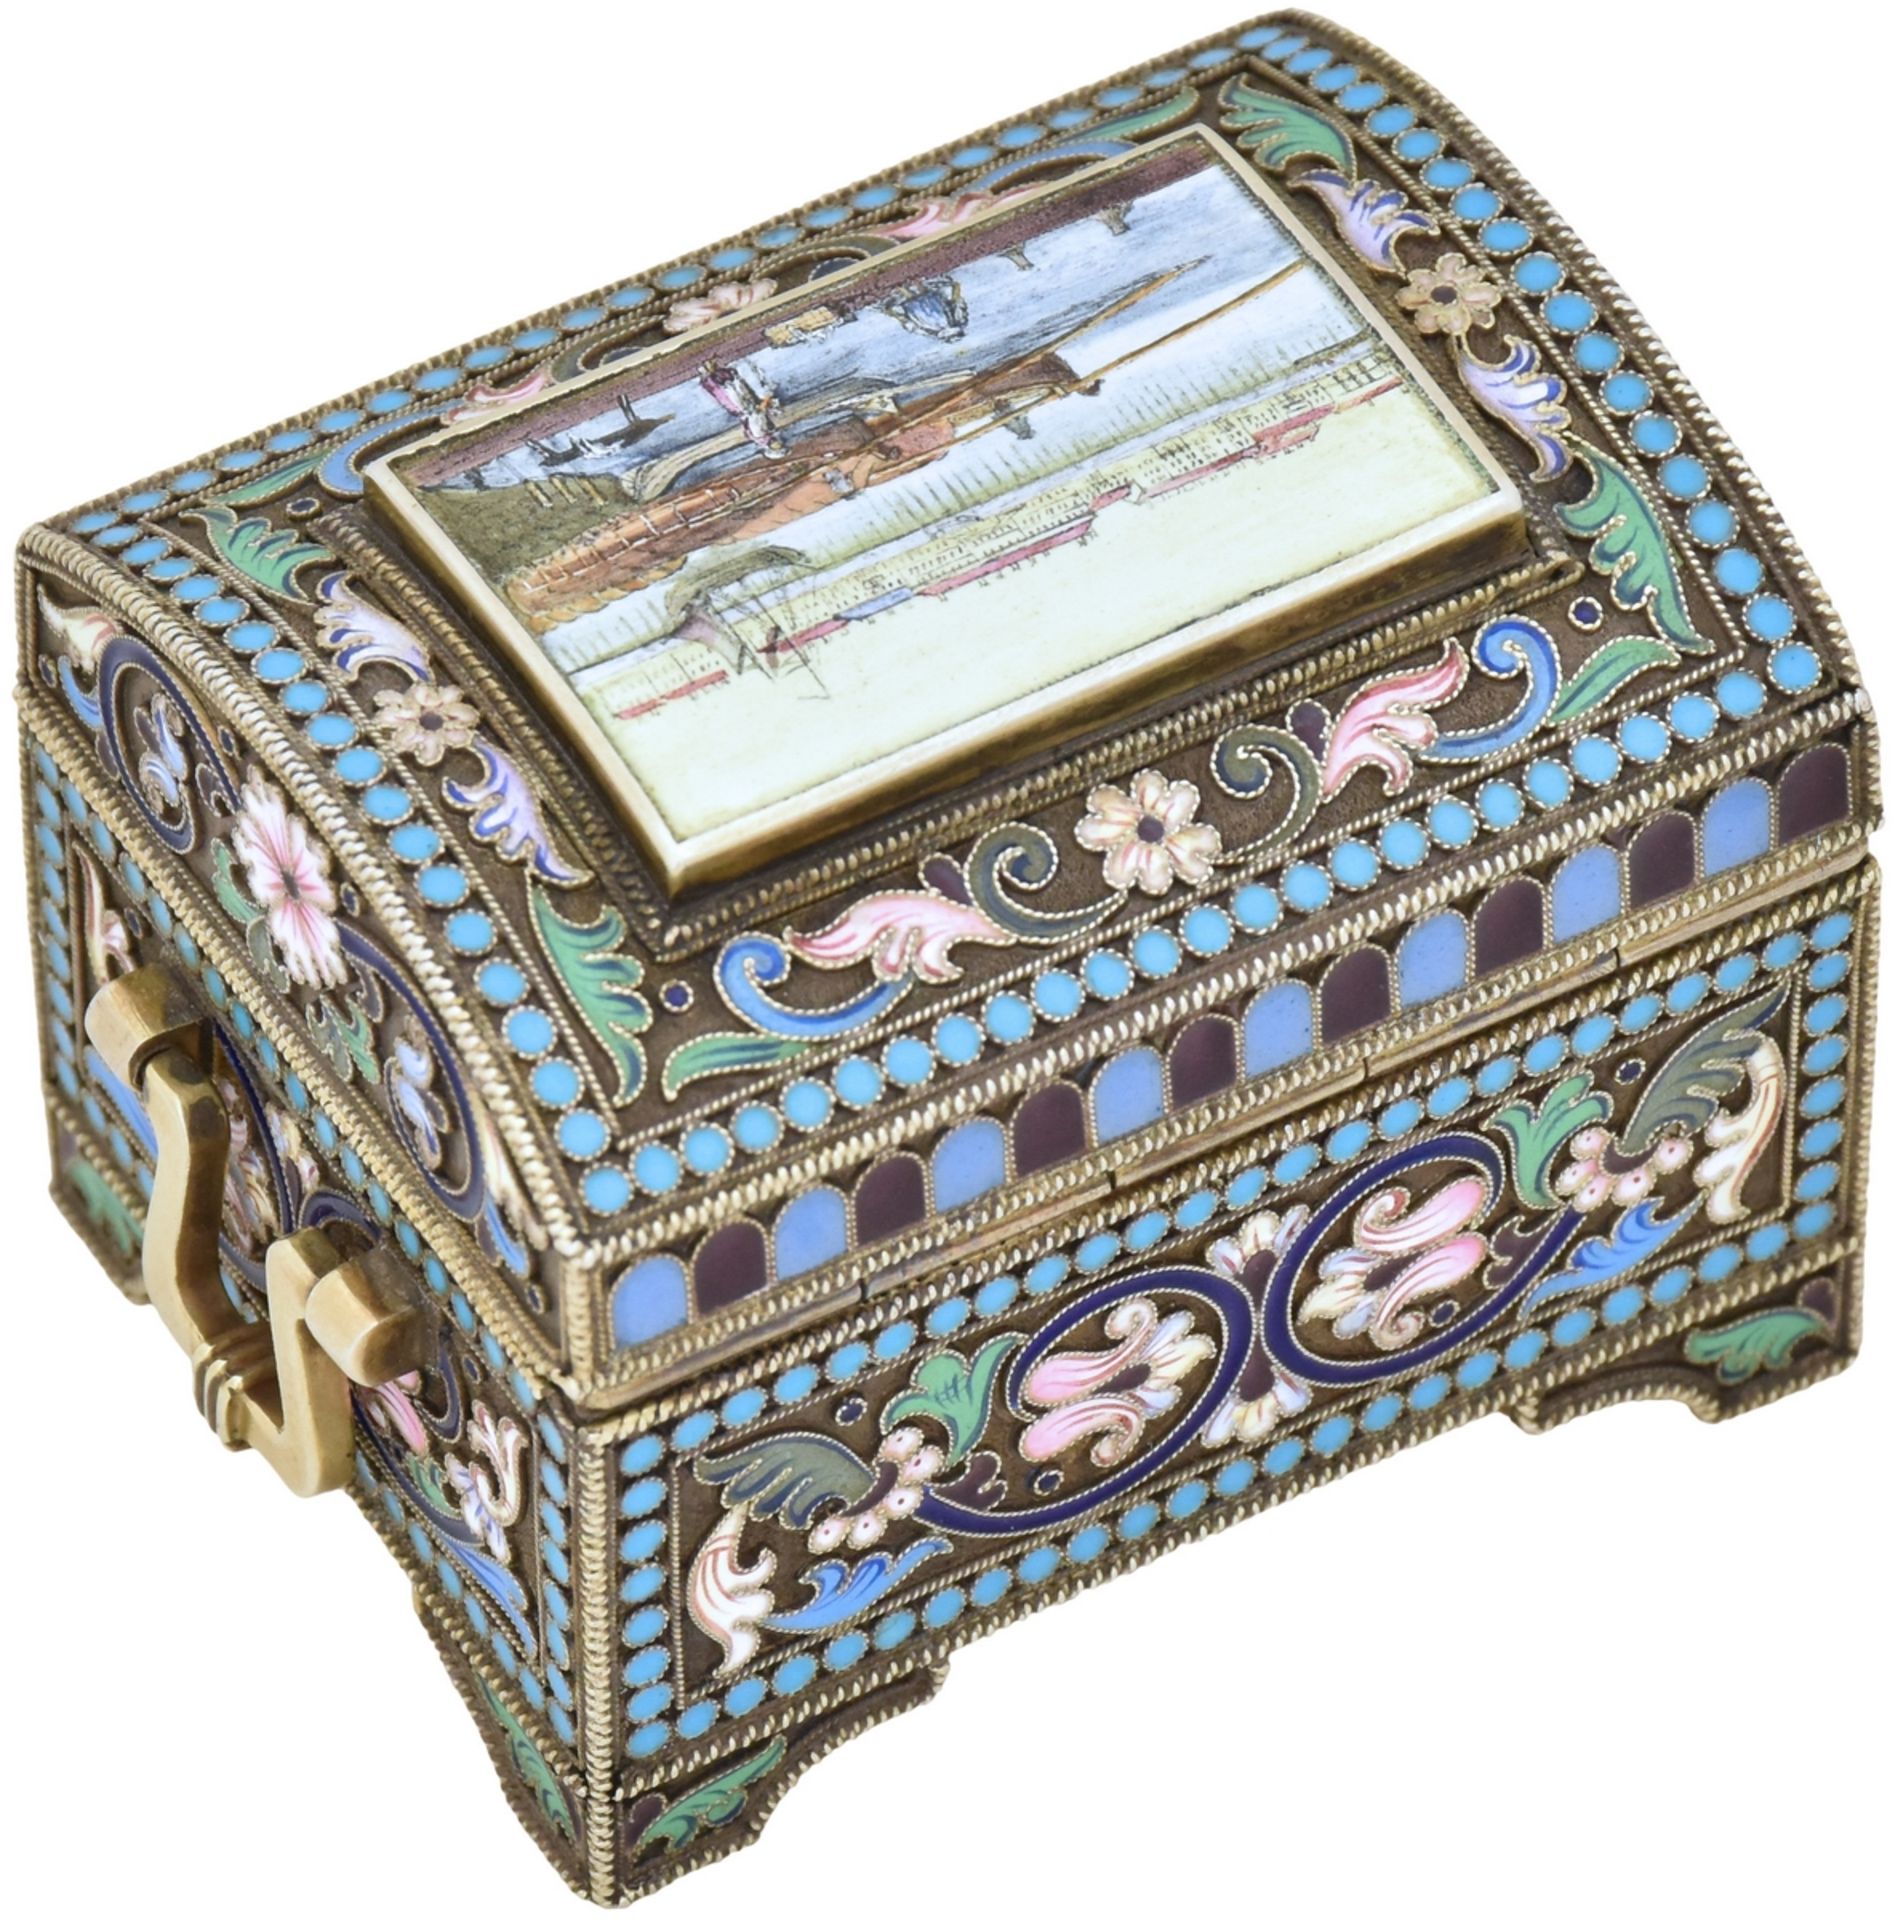 [Russian] Box a la Russe with city view on the lid. Russia. 20th century - Image 3 of 8